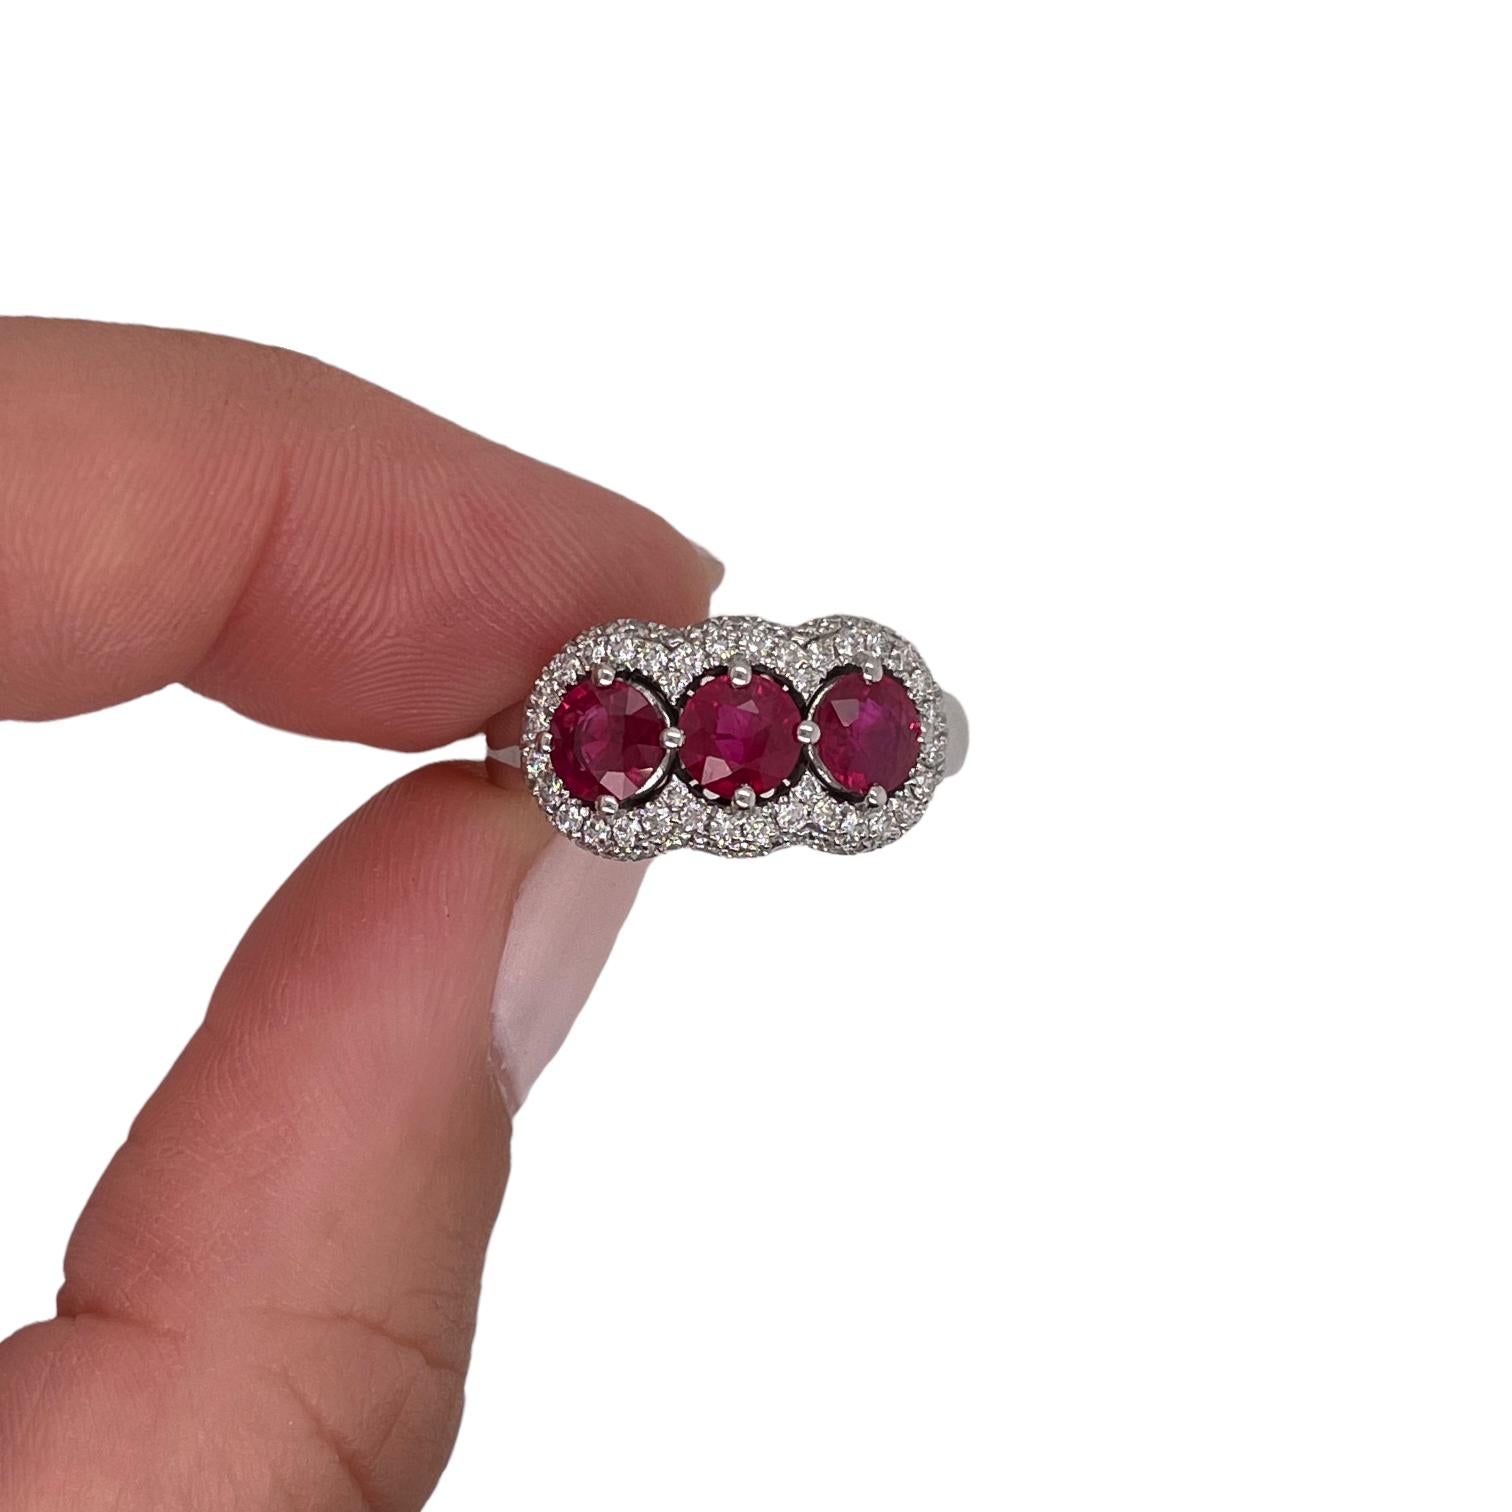 Ring contains 3 round brilliant rubies, 1.65tcw and 66 round brilliant diamonds, 0.50tcw. Diamonds are G in color and VS1 in clarity, excellent cut. All stones are mounted in 18k white gold prong settings. Ring is a size 6 and can be resized to